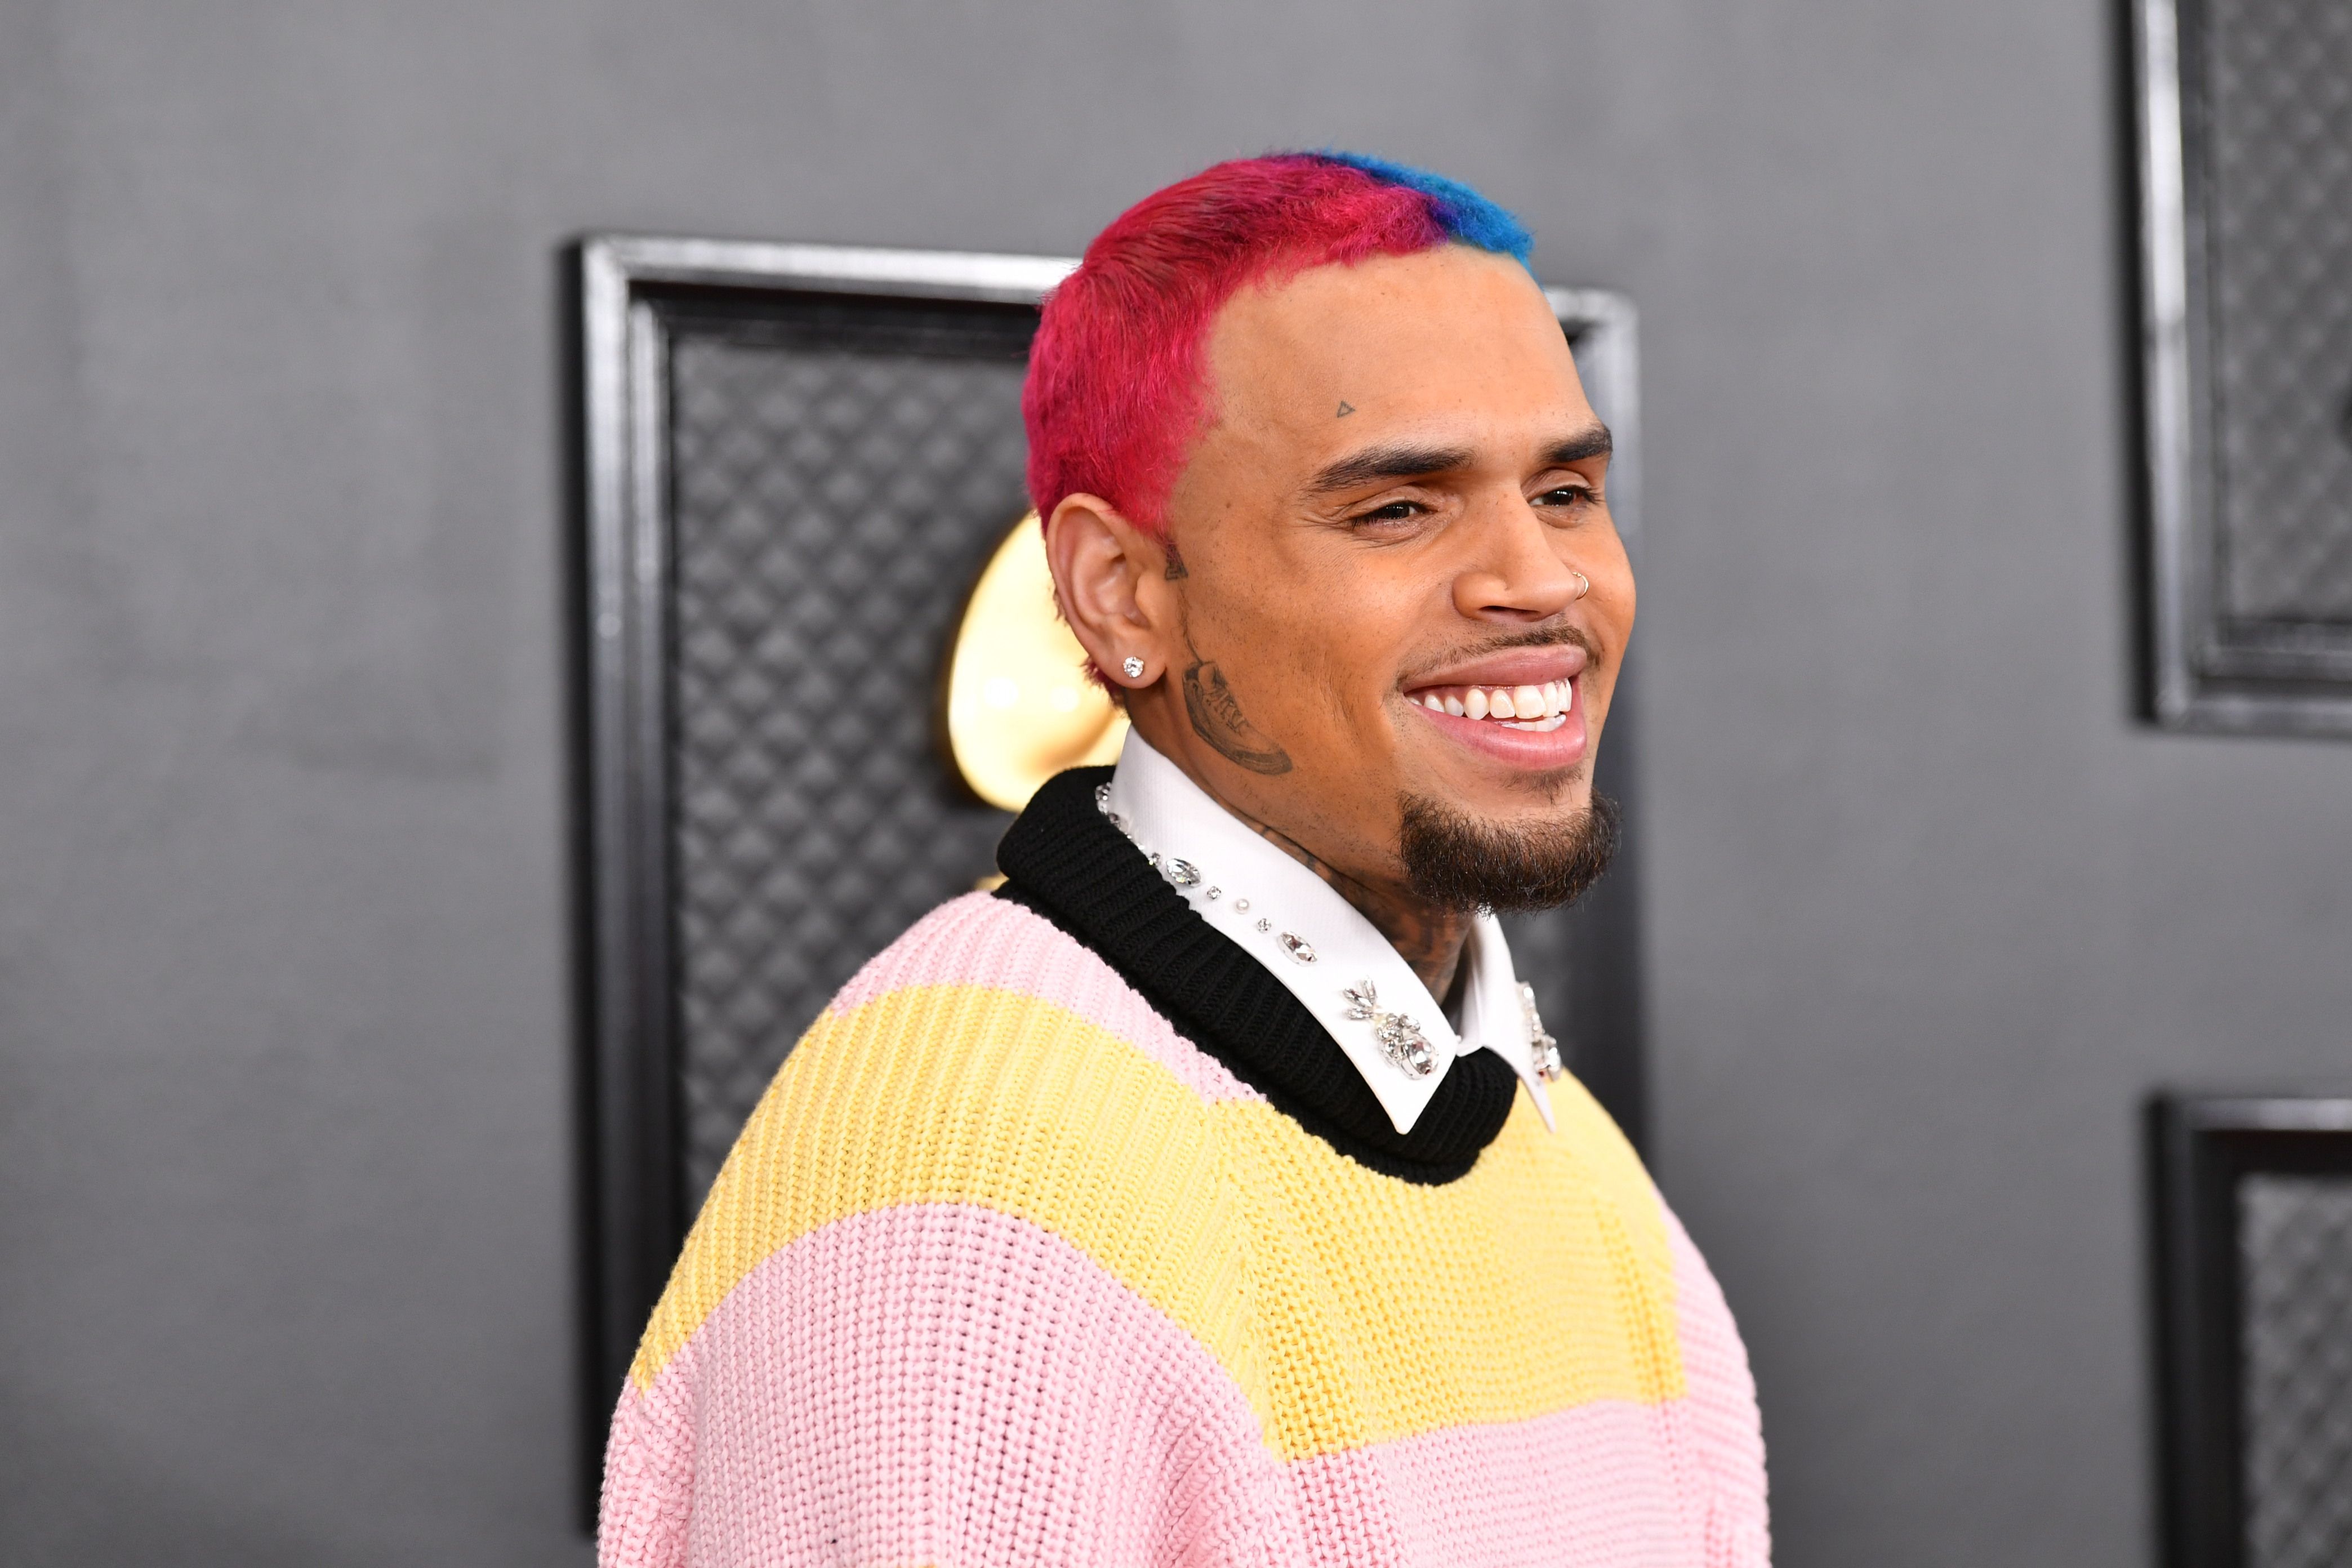 Chris Brown attends the 62nd Annual GRAMMY Awards at Staples Center on January 26, 2020 in Los Angeles, California. I Image: Getty Images.